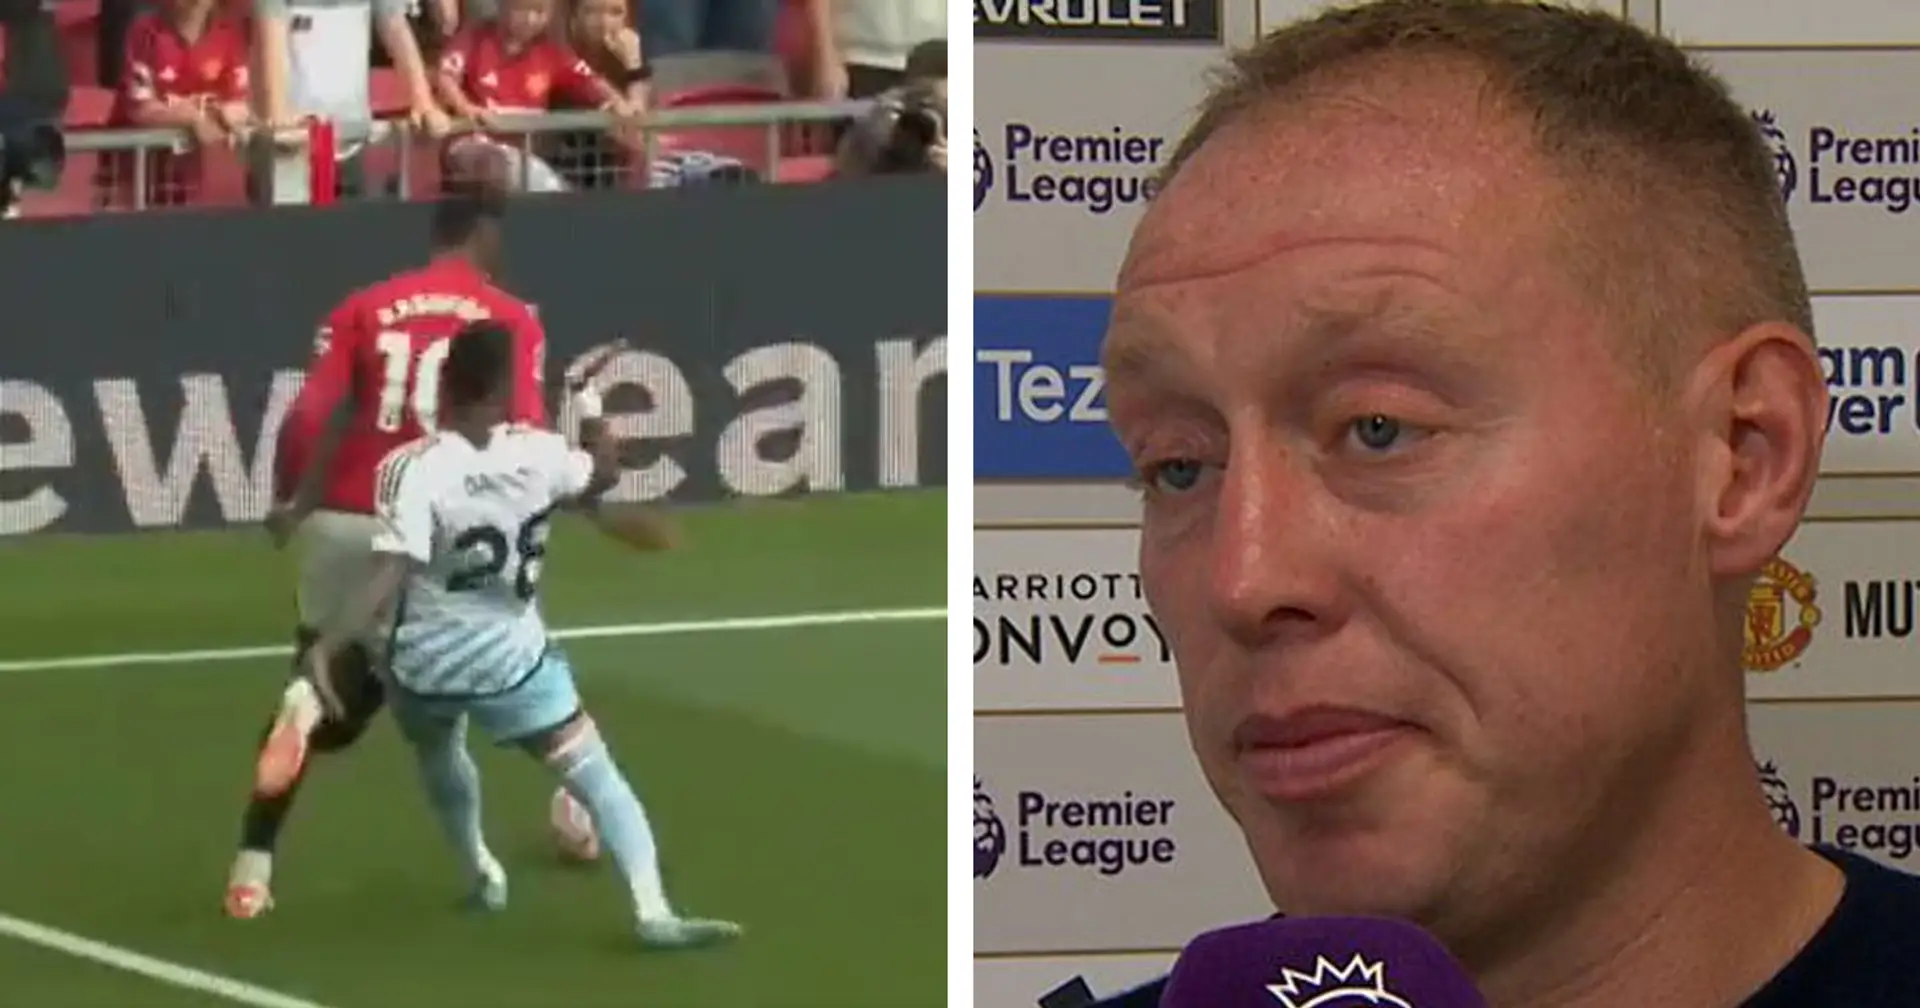 'Will bite my tongue': Nottingham Forest manager Cooper unimpressed with Man United penalty decision